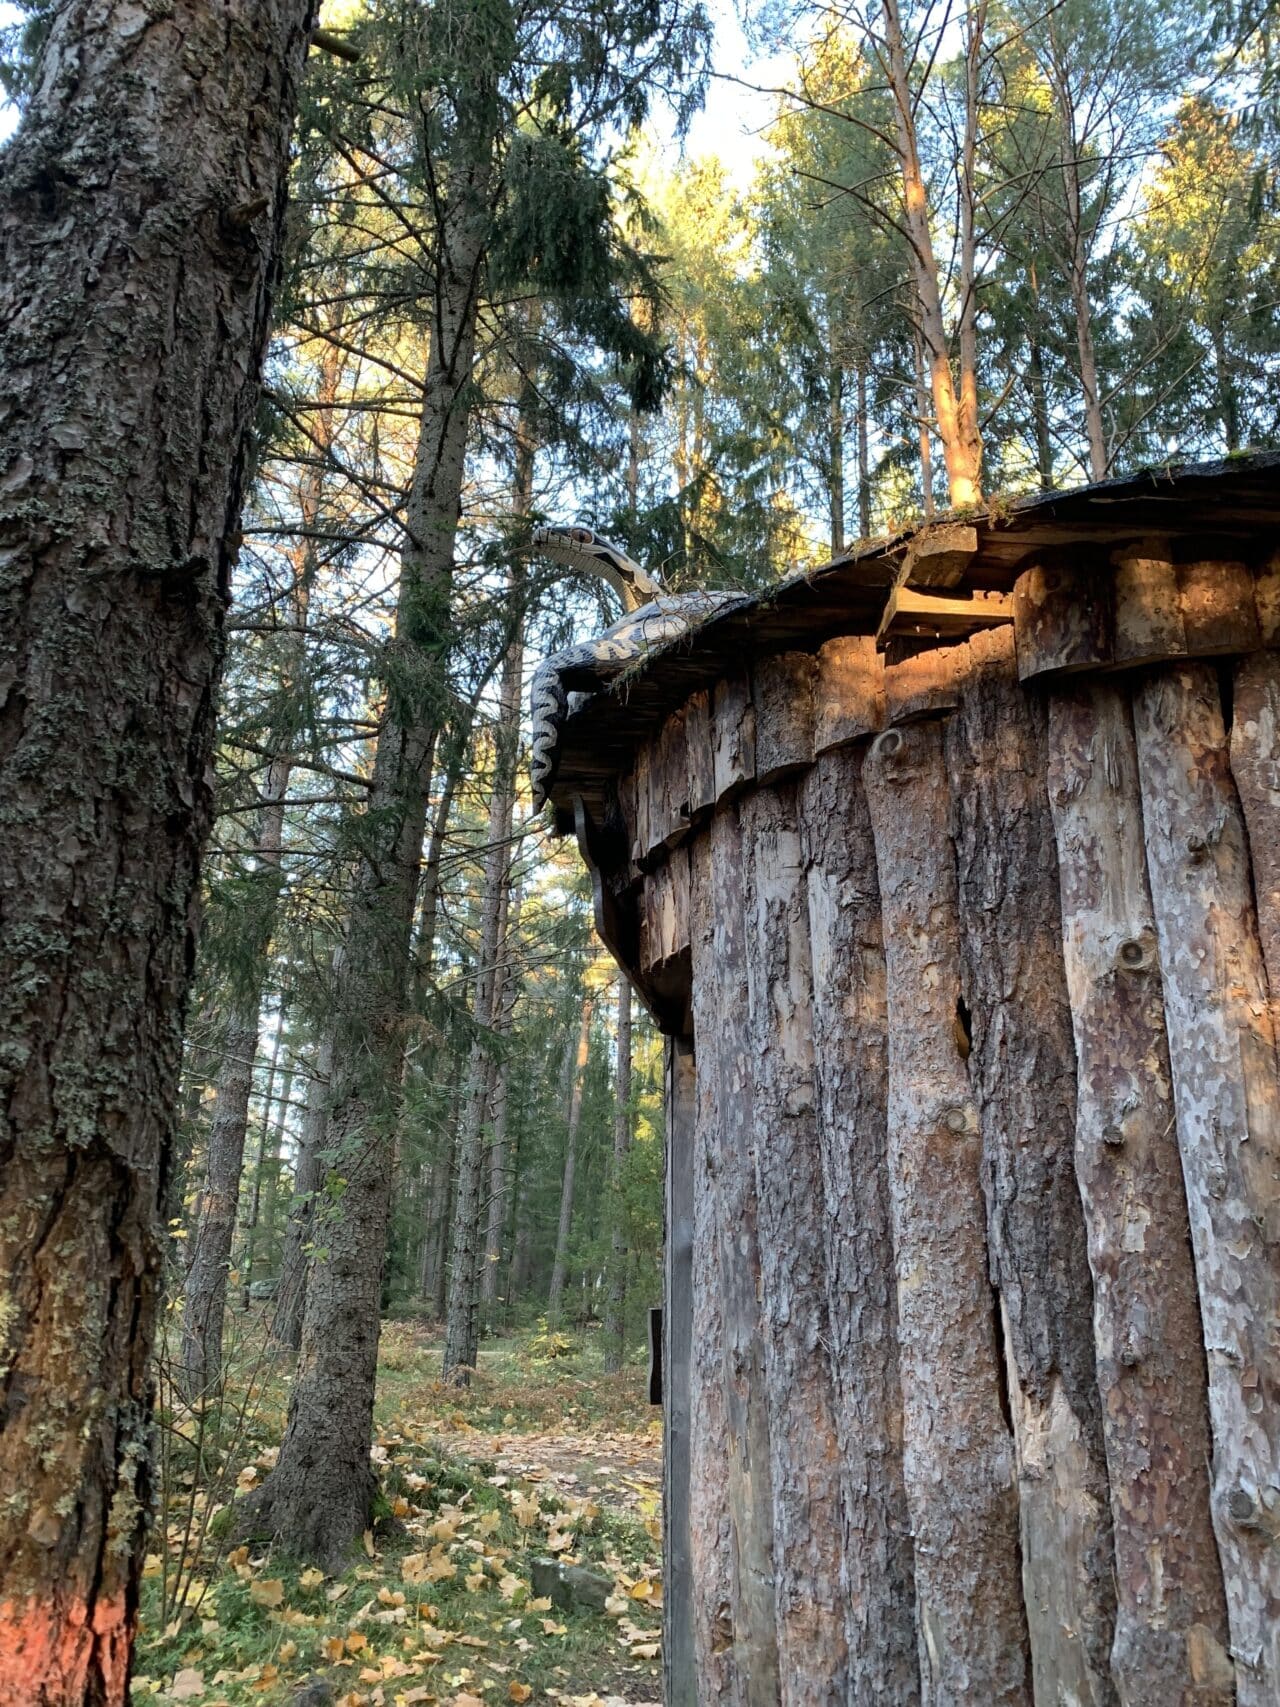 Wooden Log Hut In A Pine Forest